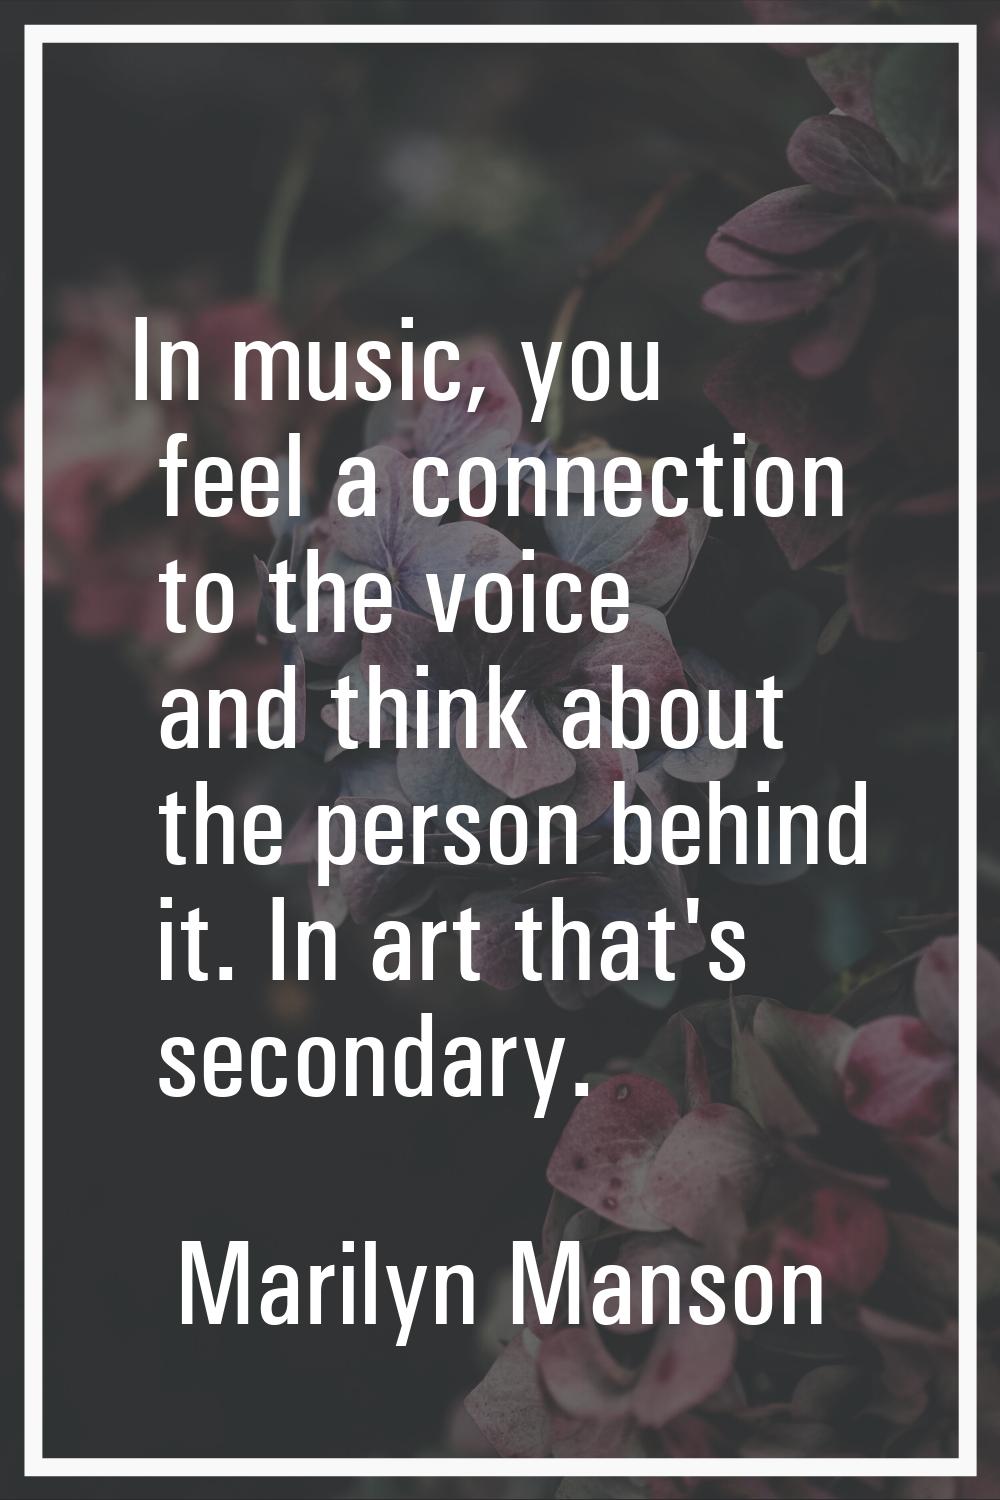 In music, you feel a connection to the voice and think about the person behind it. In art that's se